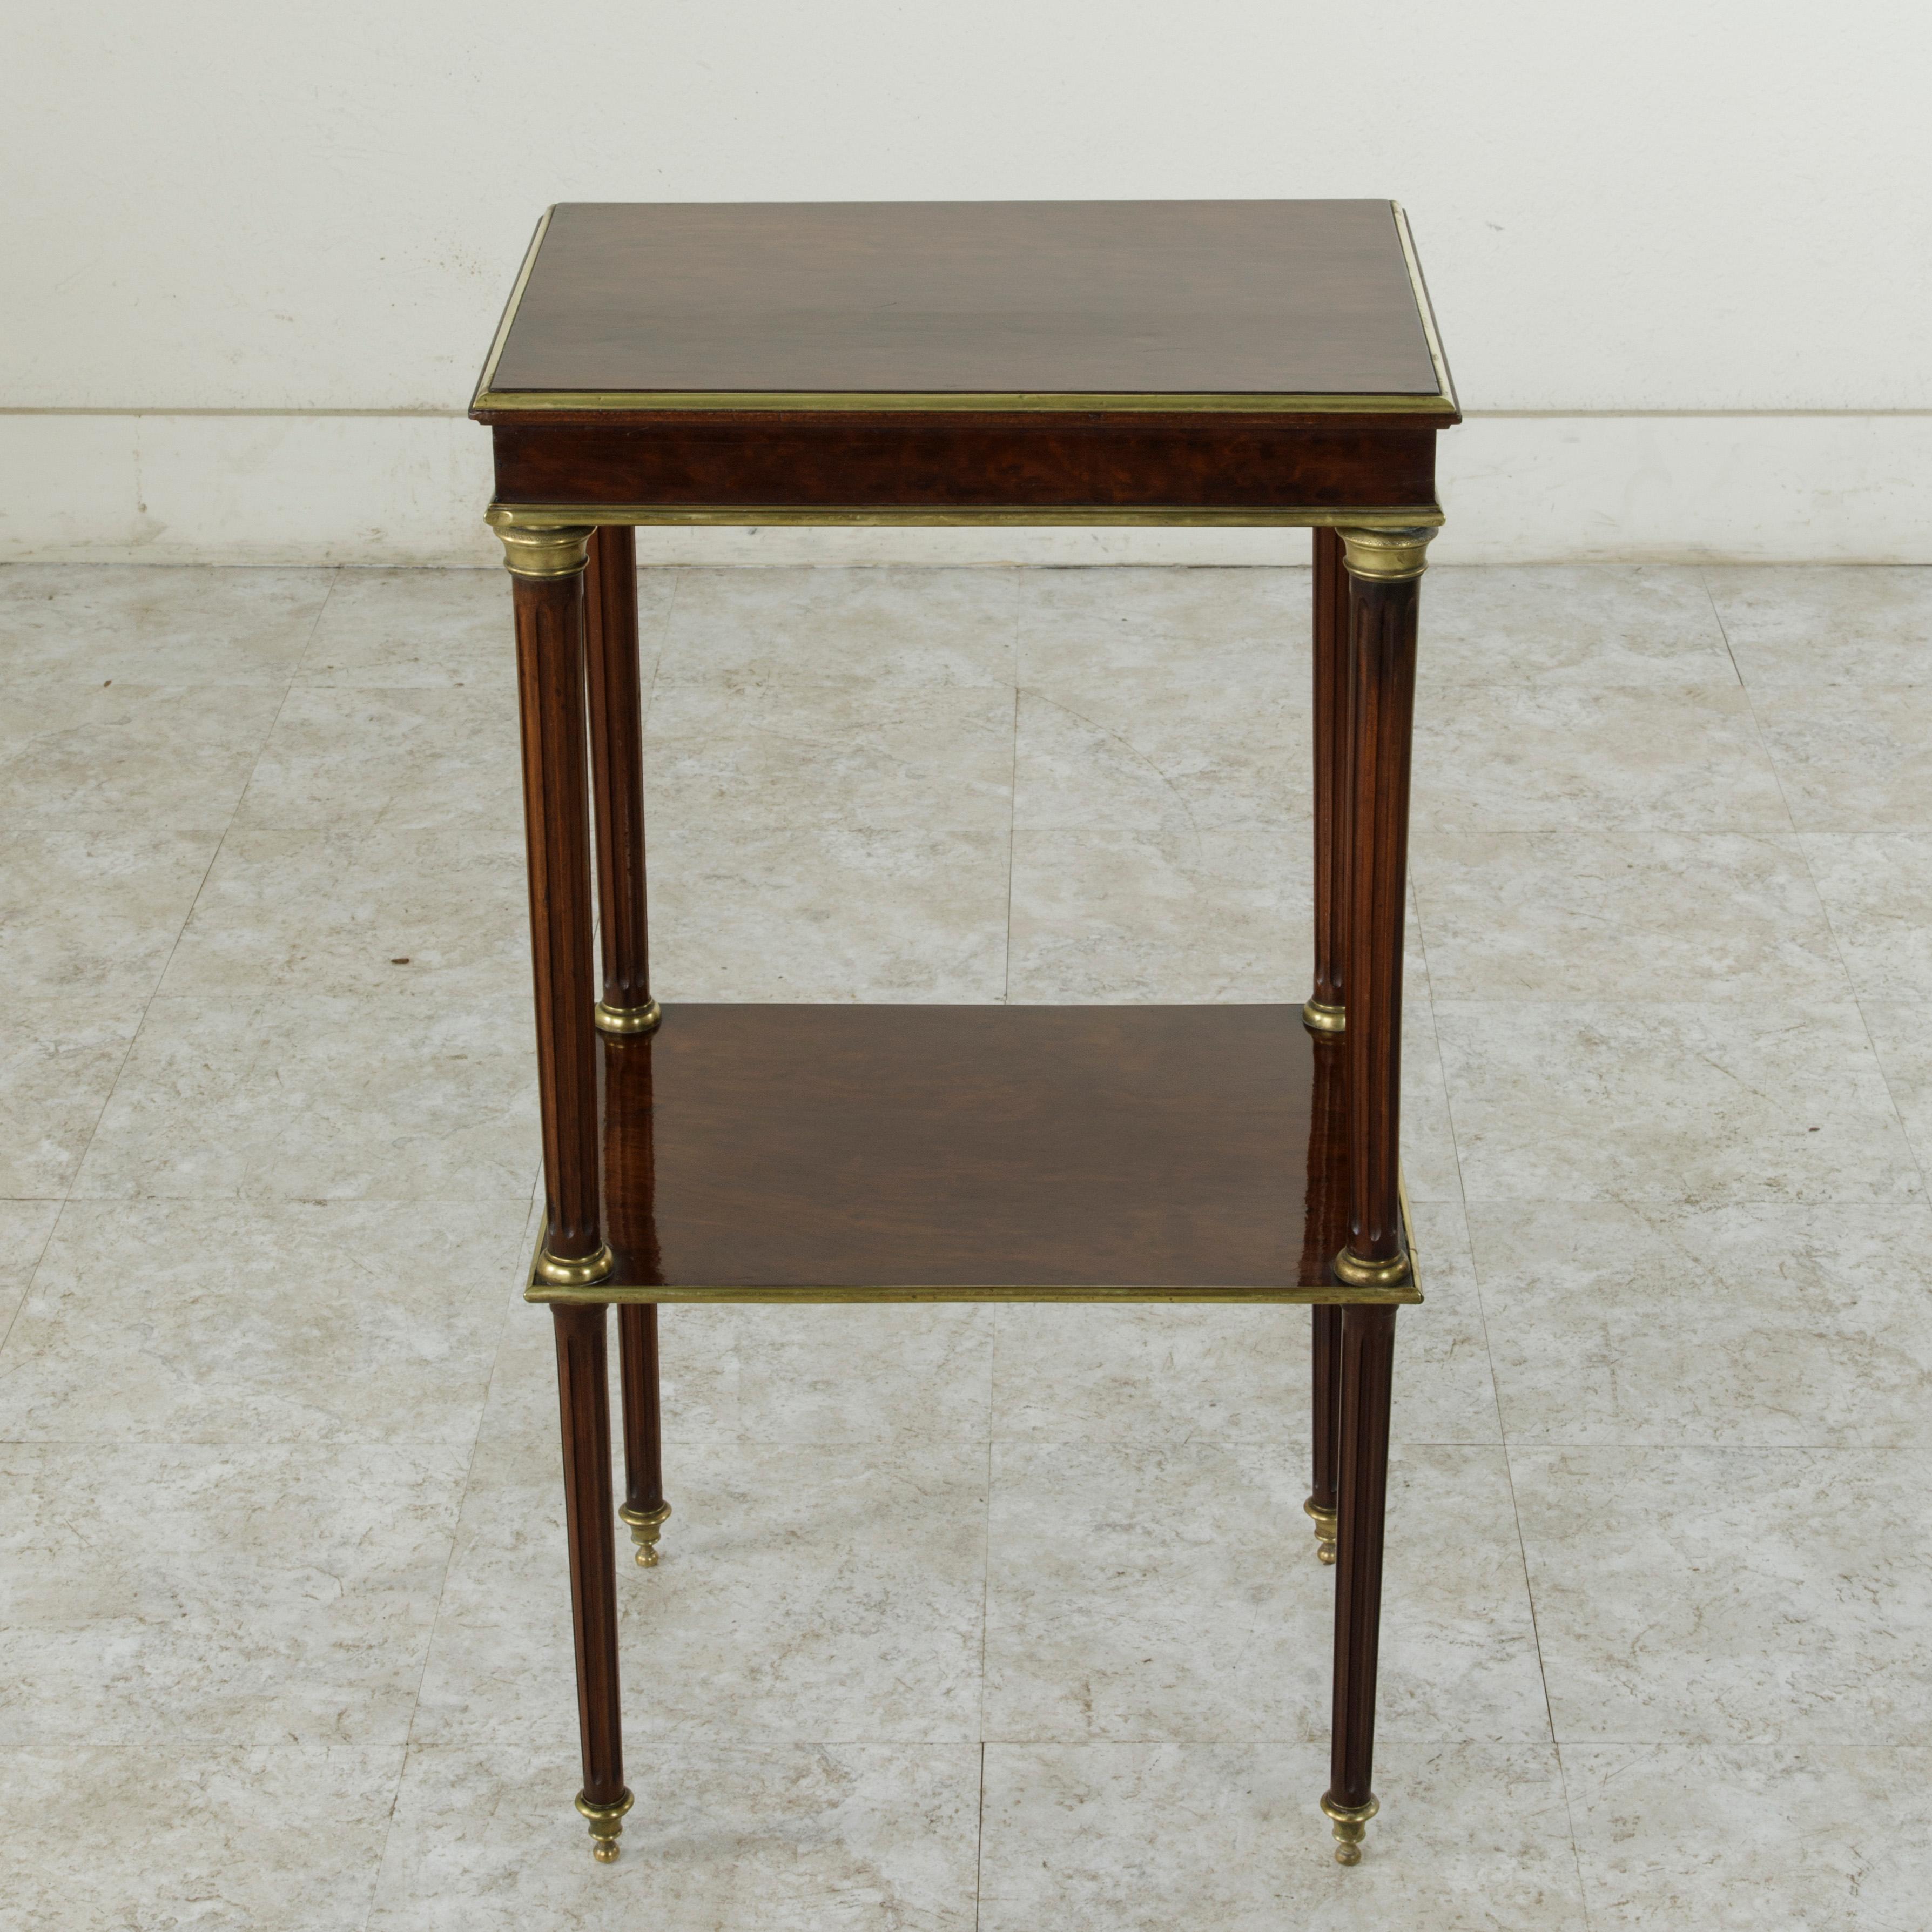 This mid-19th century French Louis XVI style side table constructed of rich plum pudding mahogany features bronze trim that surrounds the piece on all sides. The top rests on tapered fluted legs finished with bronze sabots. A lower shelf also